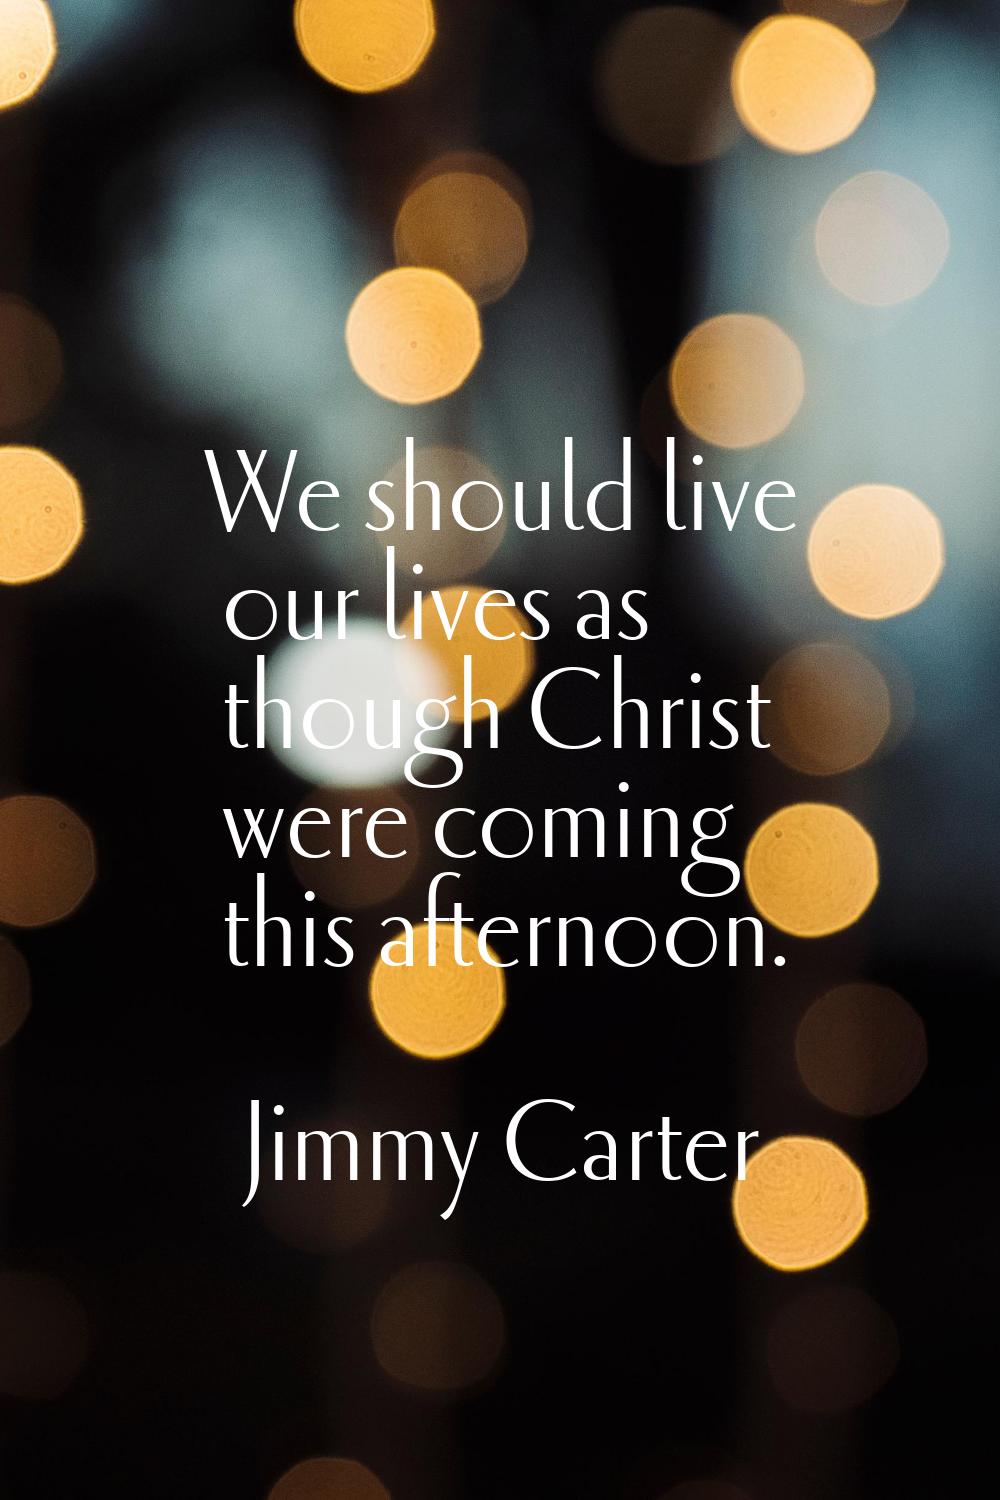 We should live our lives as though Christ were coming this afternoon.